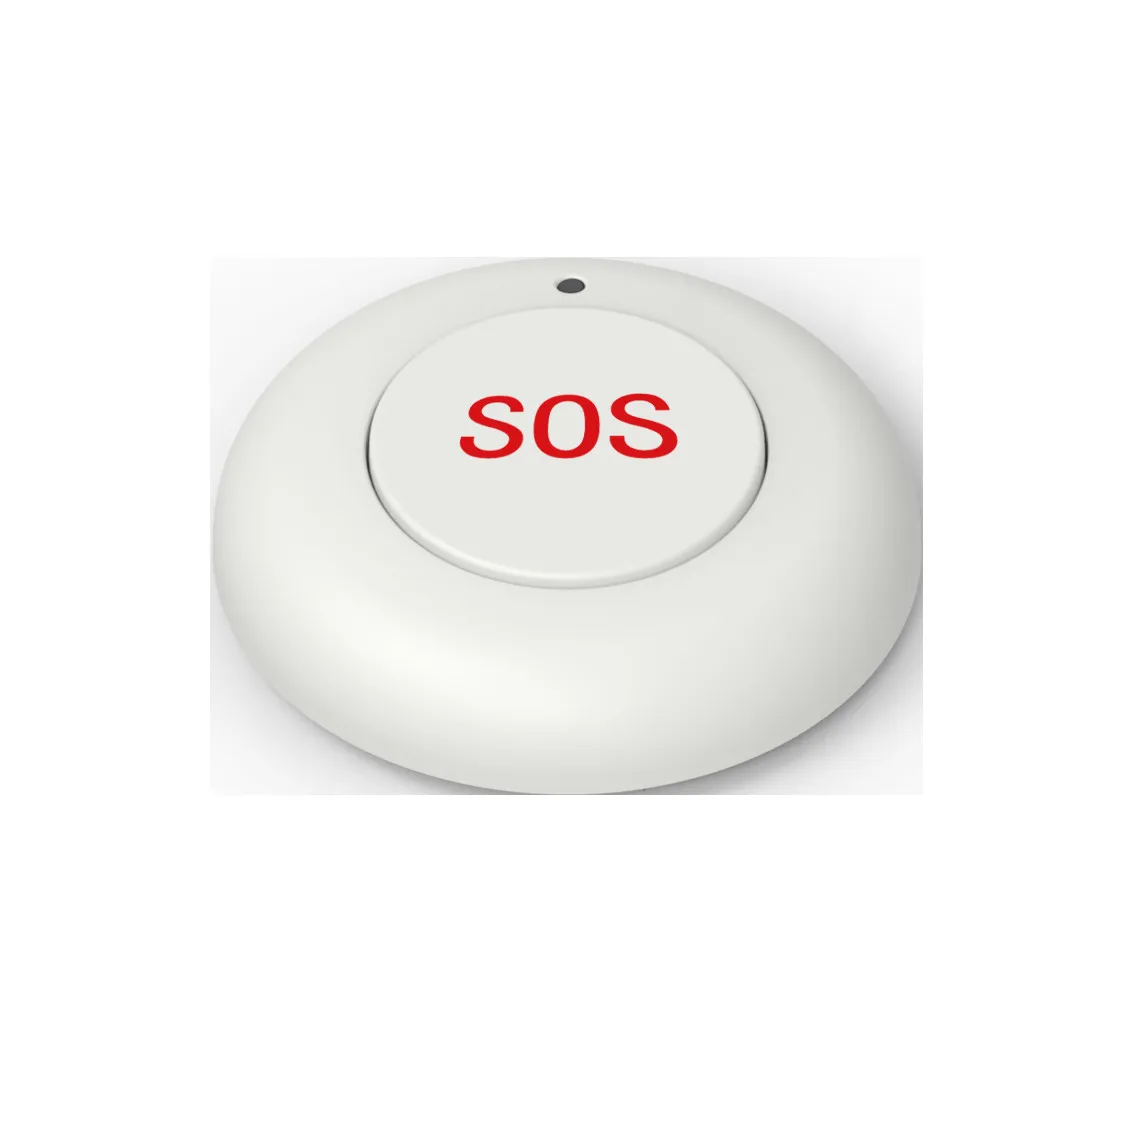 Wireless SOS Emergency Alarm Button for Elderly Children House Home Security Kits